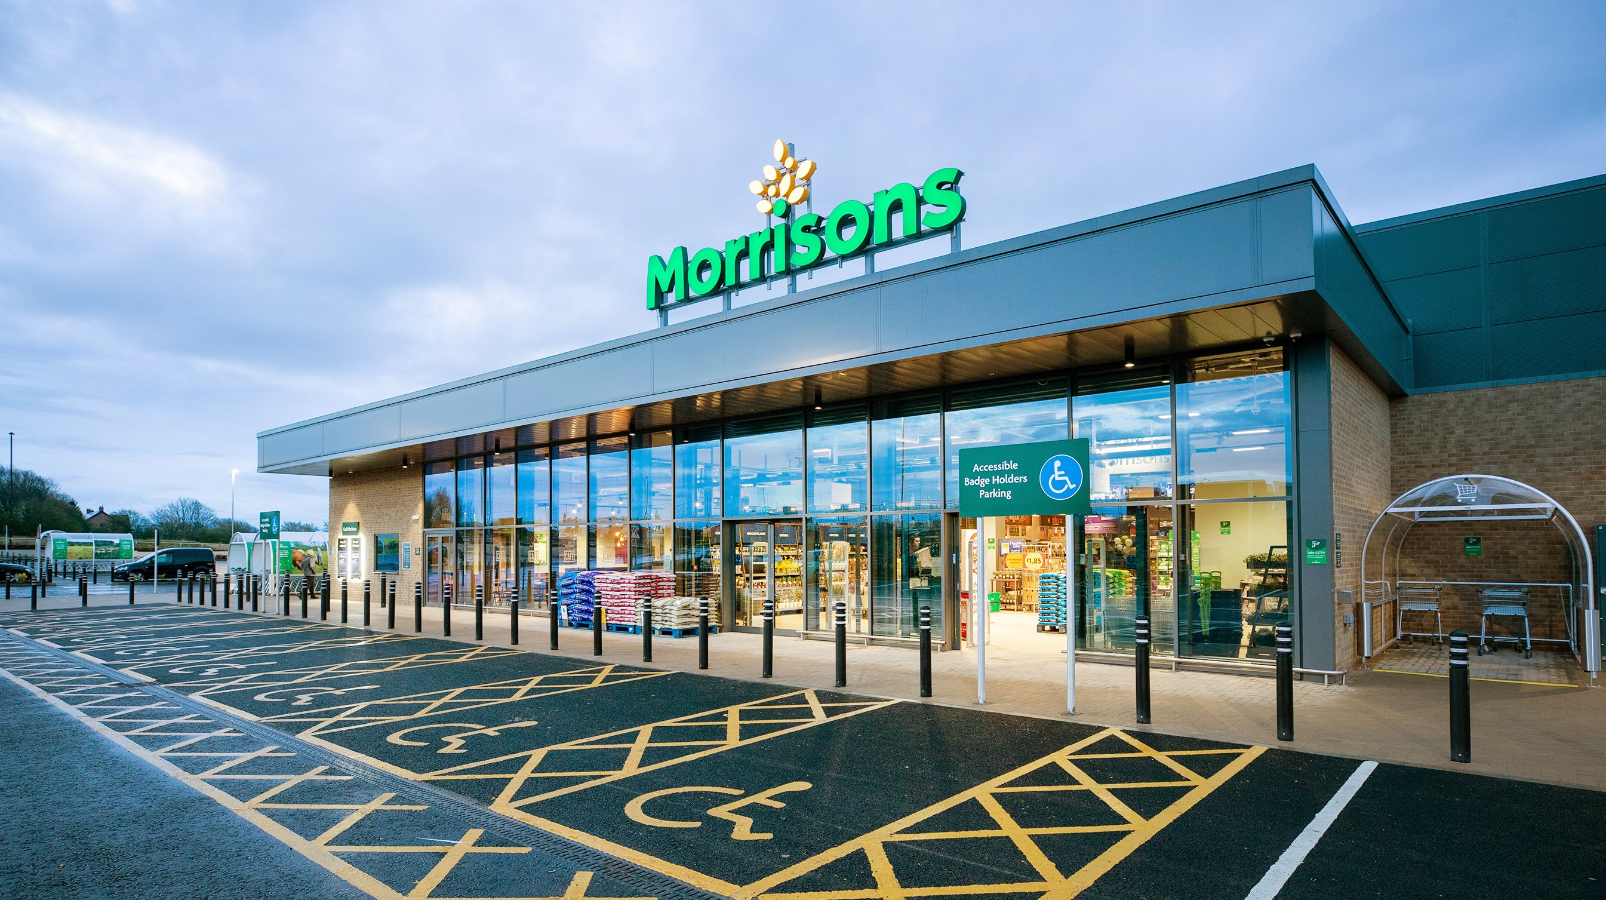 Morrisons introduces sustainable packaging for meat products